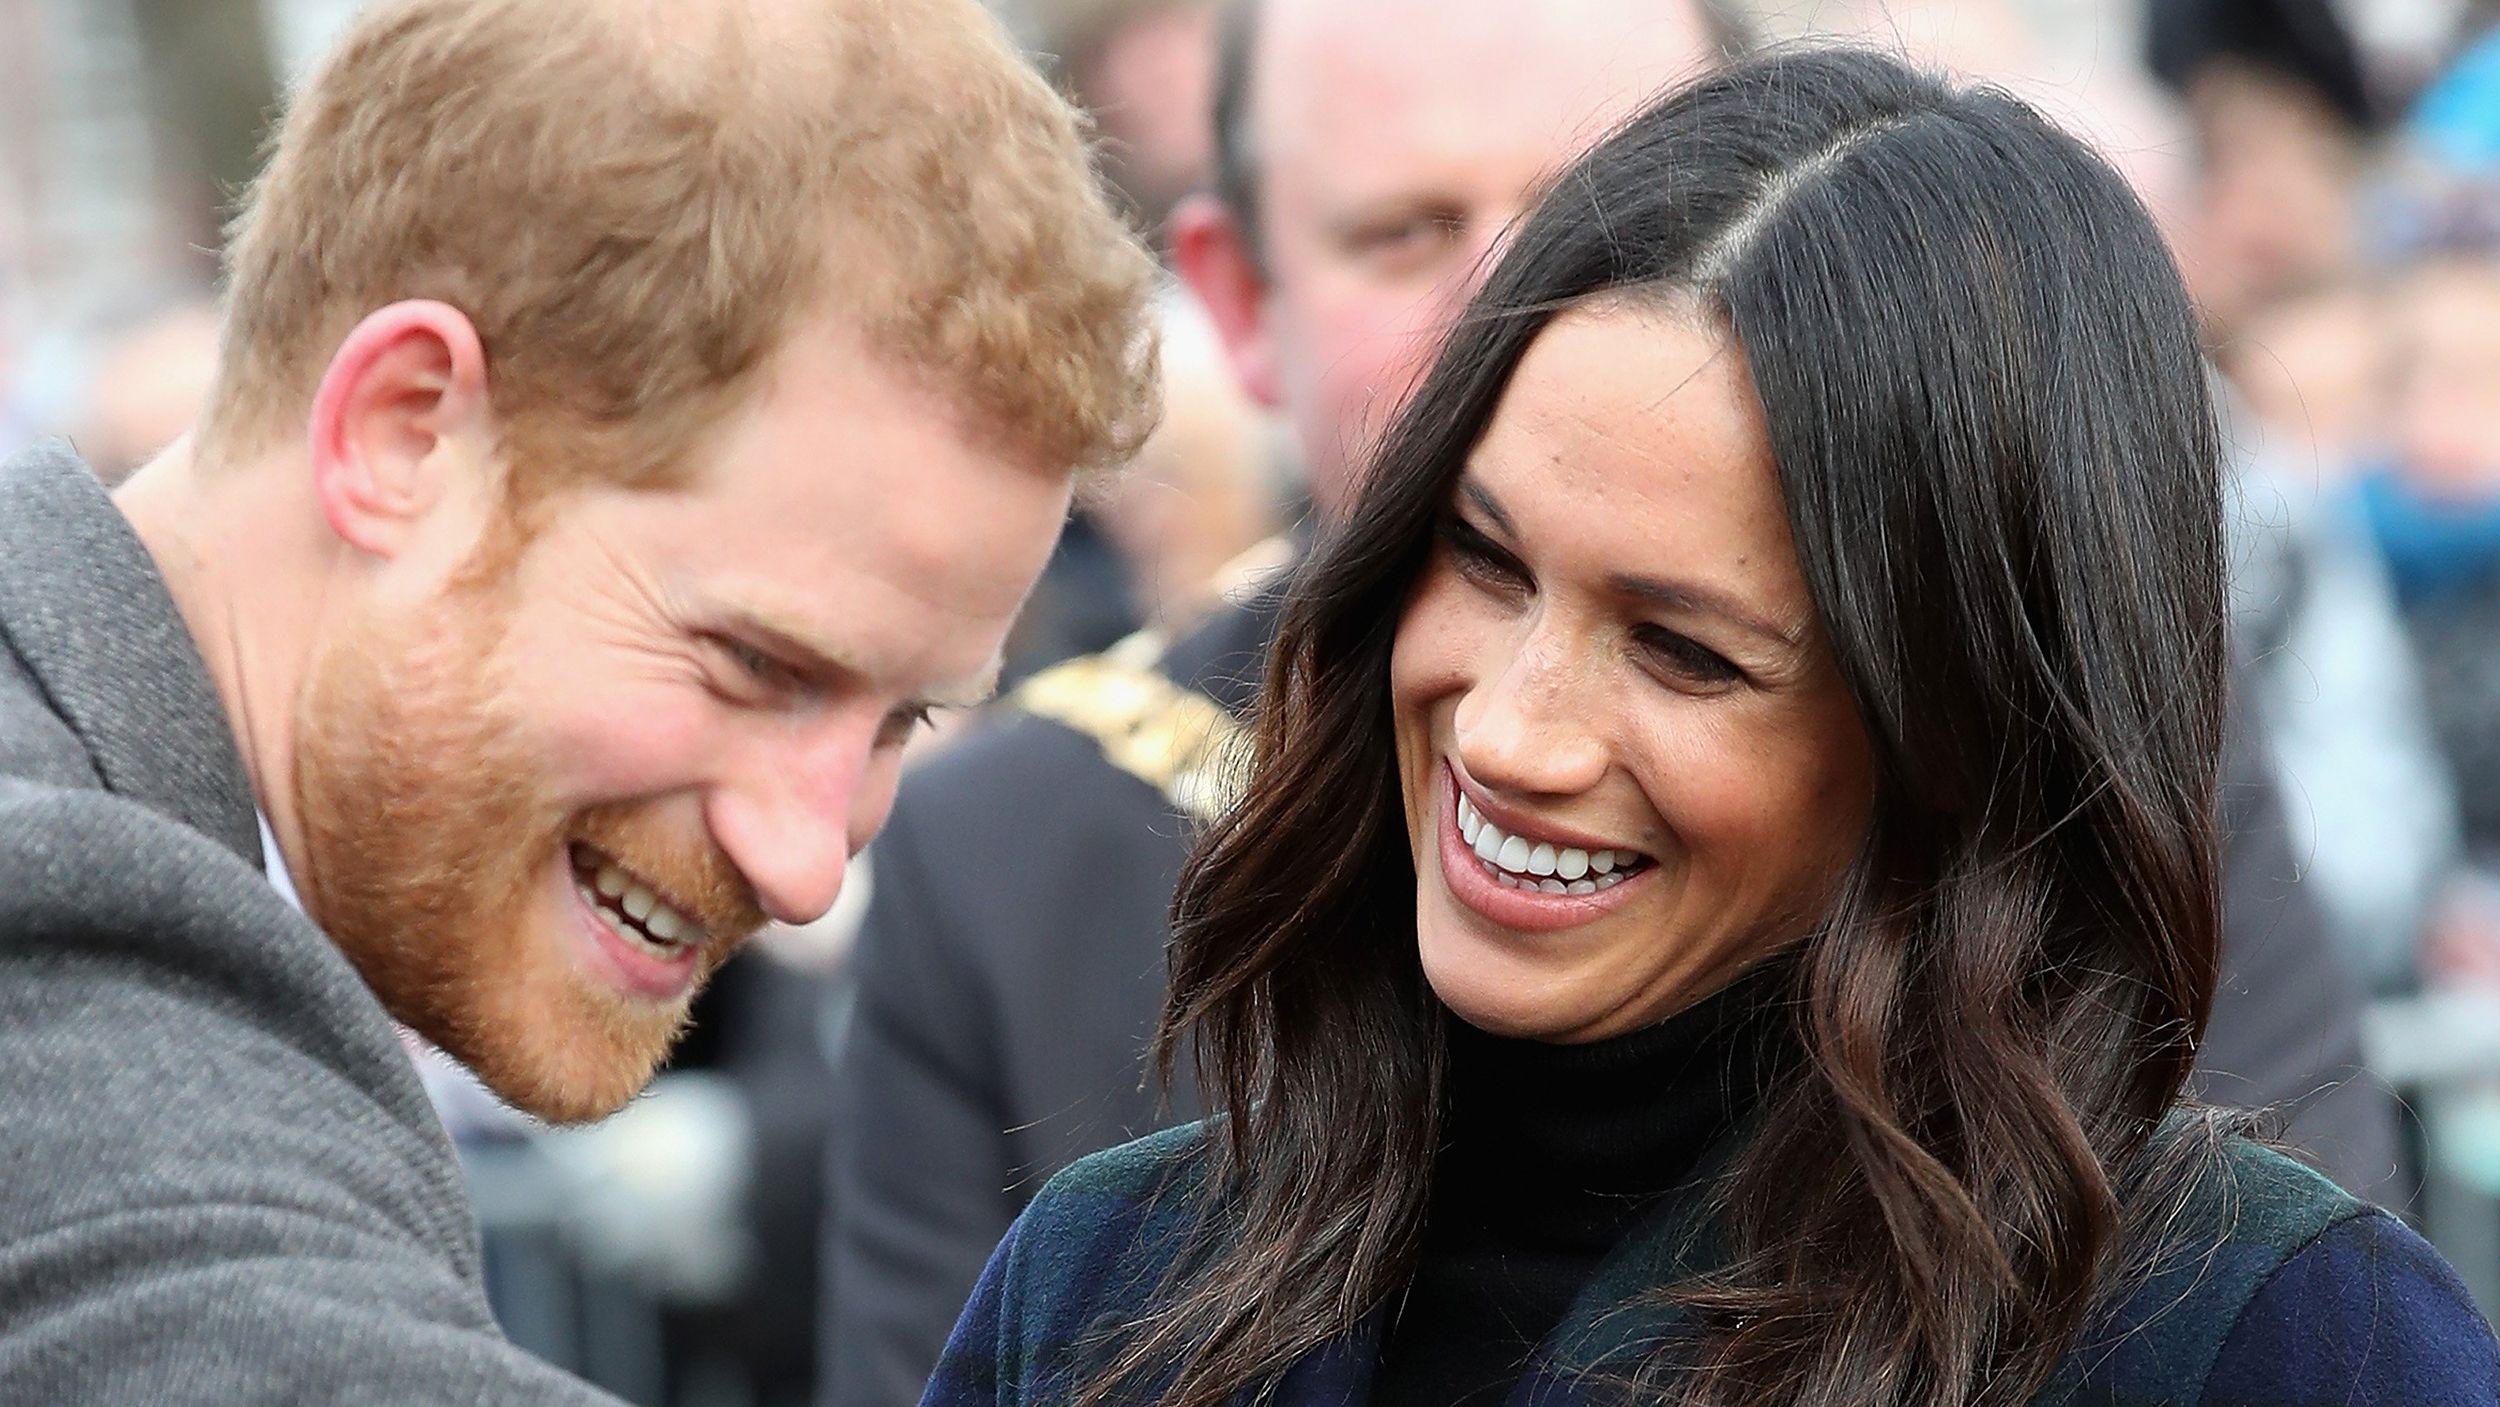 Prince Harry and Meghan Markle's royal titles will be the Duke